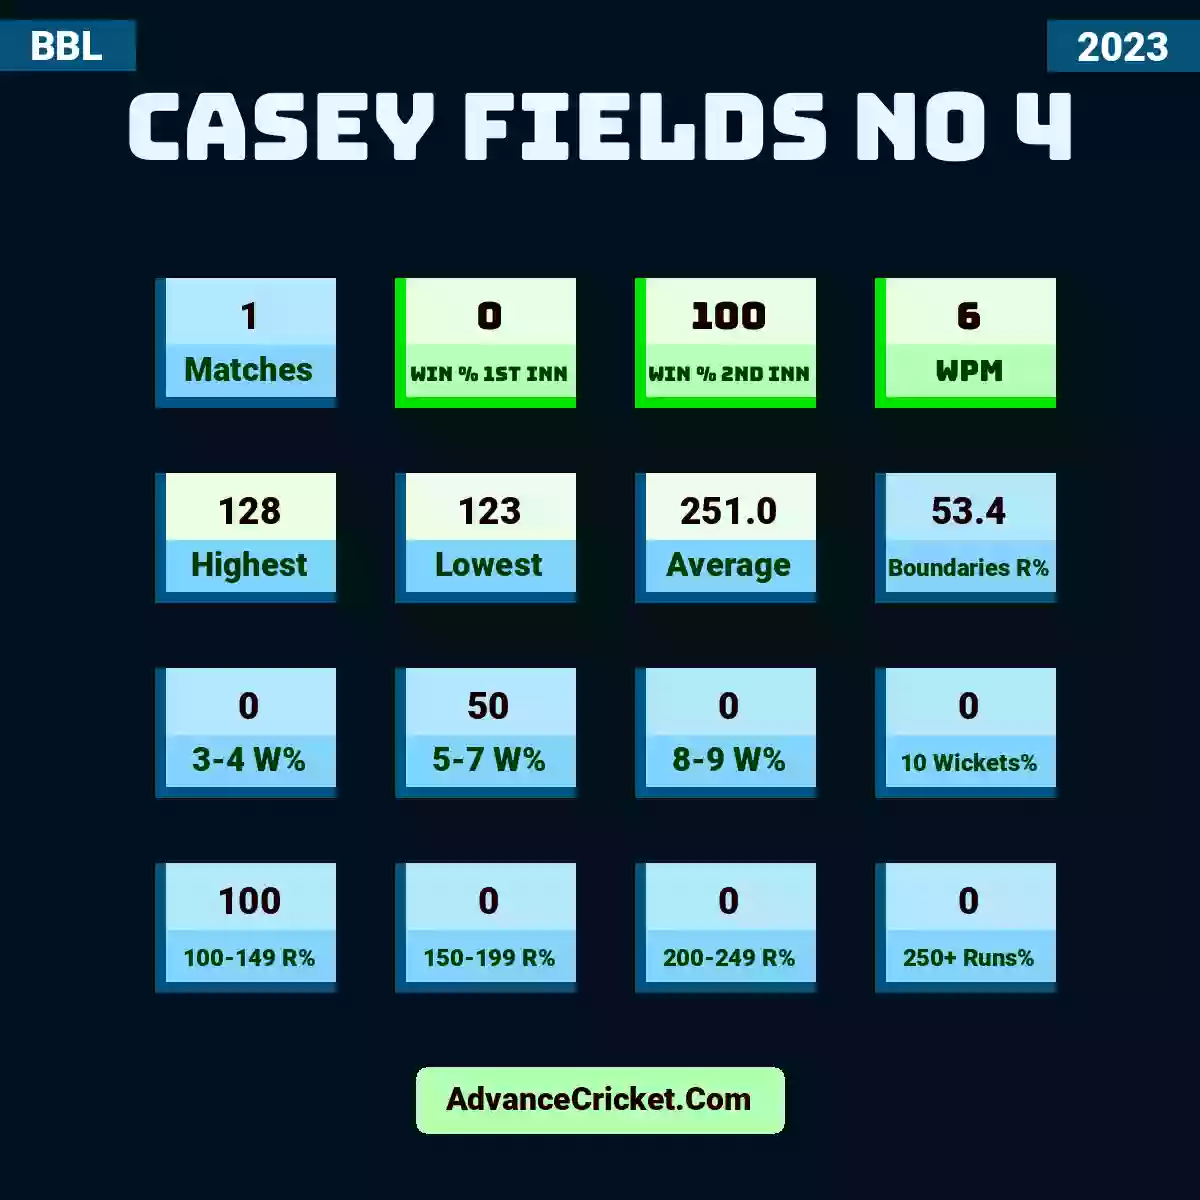 Image showing Casey Fields No 4 with Matches: 1, Win % 1st Inn: 0, Win % 2nd Inn: 100, WPM: 6, Highest: 128, Lowest: 123, Average: 251.0, Boundaries R%: 53.4, 3-4 W%: 0, 5-7 W%: 50, 8-9 W%: 0, 10 Wickets%: 0, 100-149 R%: 100, 150-199 R%: 0, 200-249 R%: 0, 250+ Runs%: 0.